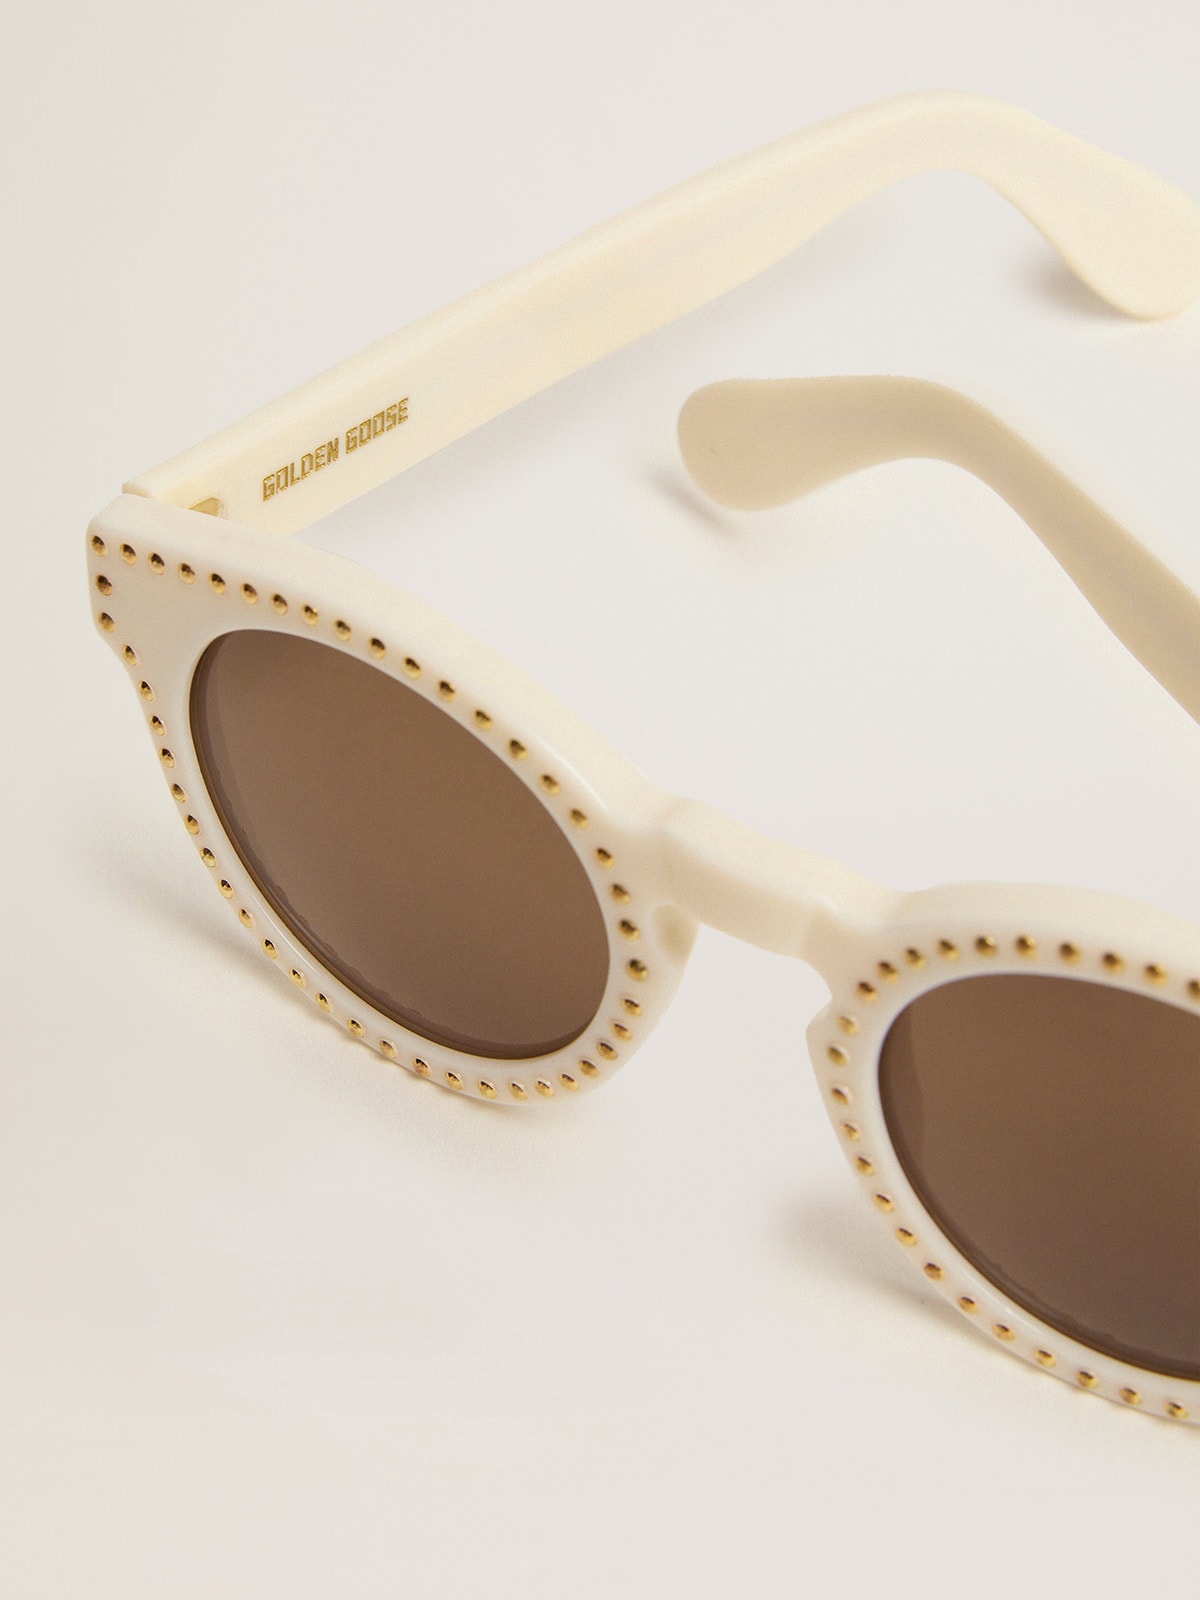 Golden Goose - Sunglasses Panthos model with white frame and gold studs in 